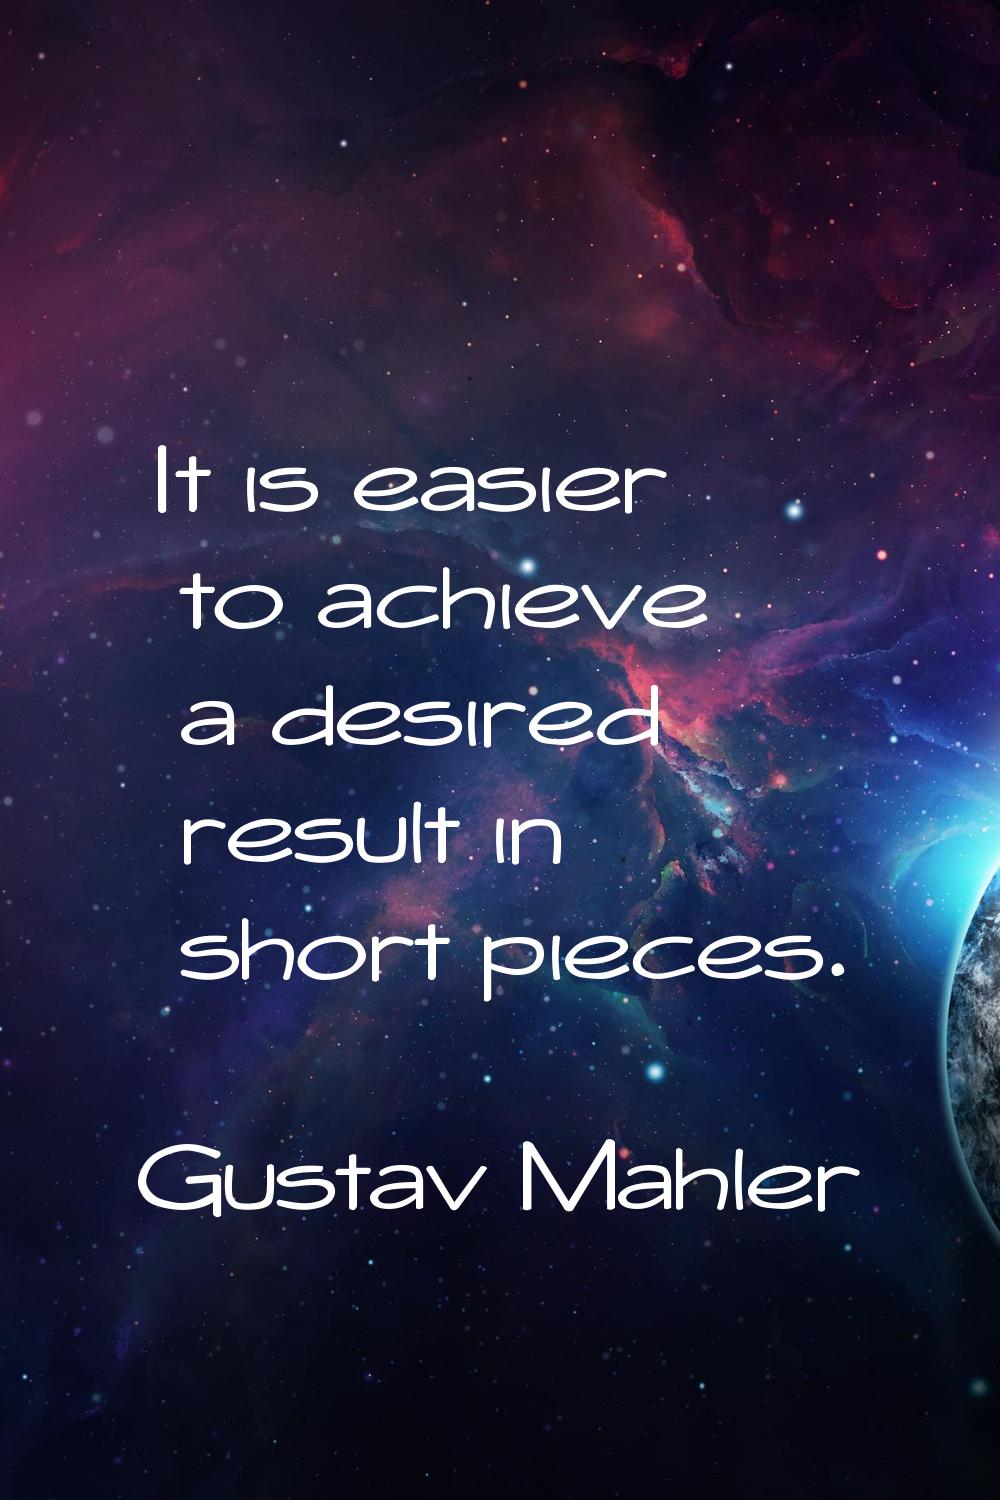 It is easier to achieve a desired result in short pieces.